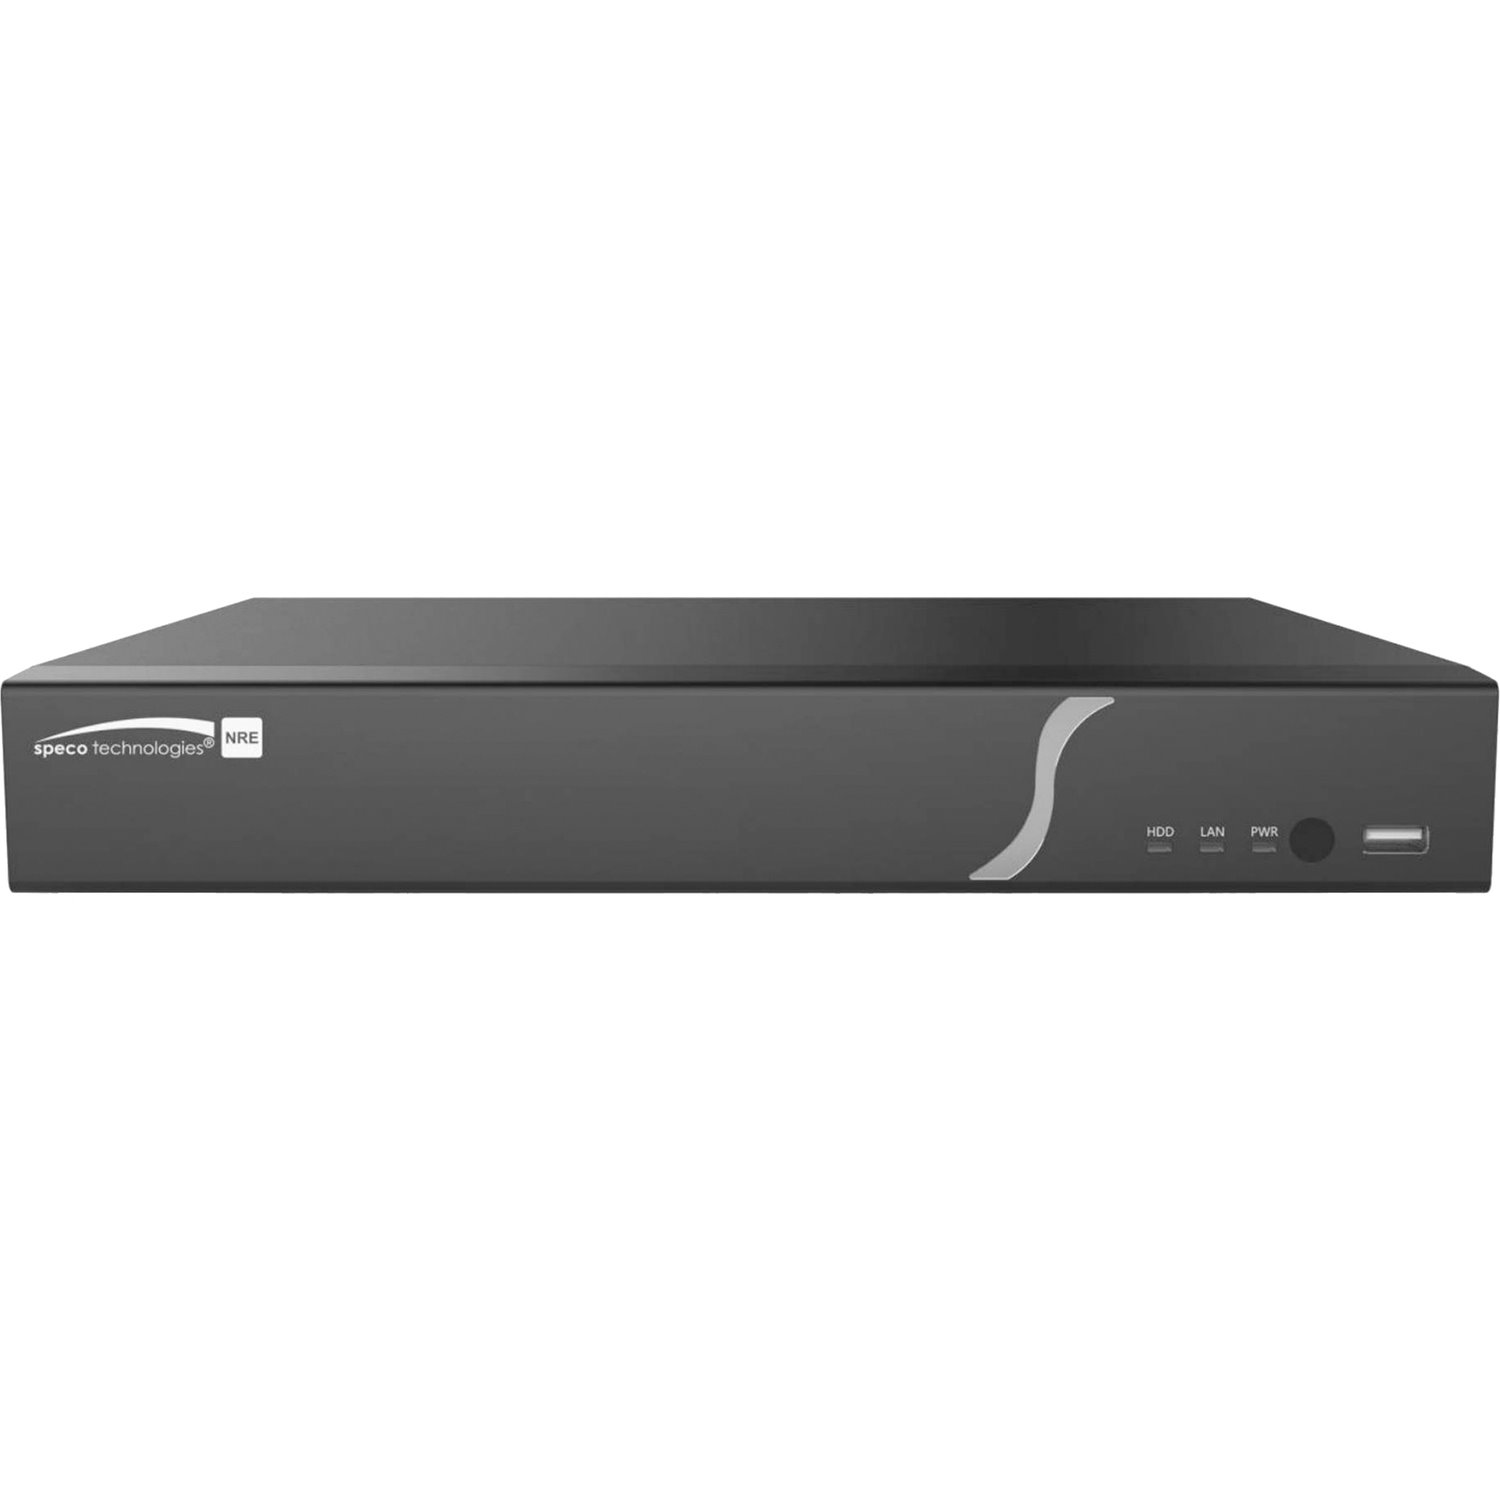 Speco 4K H.265 NVR with Facial Recognition and Smart Analytics - 4 TB HDD